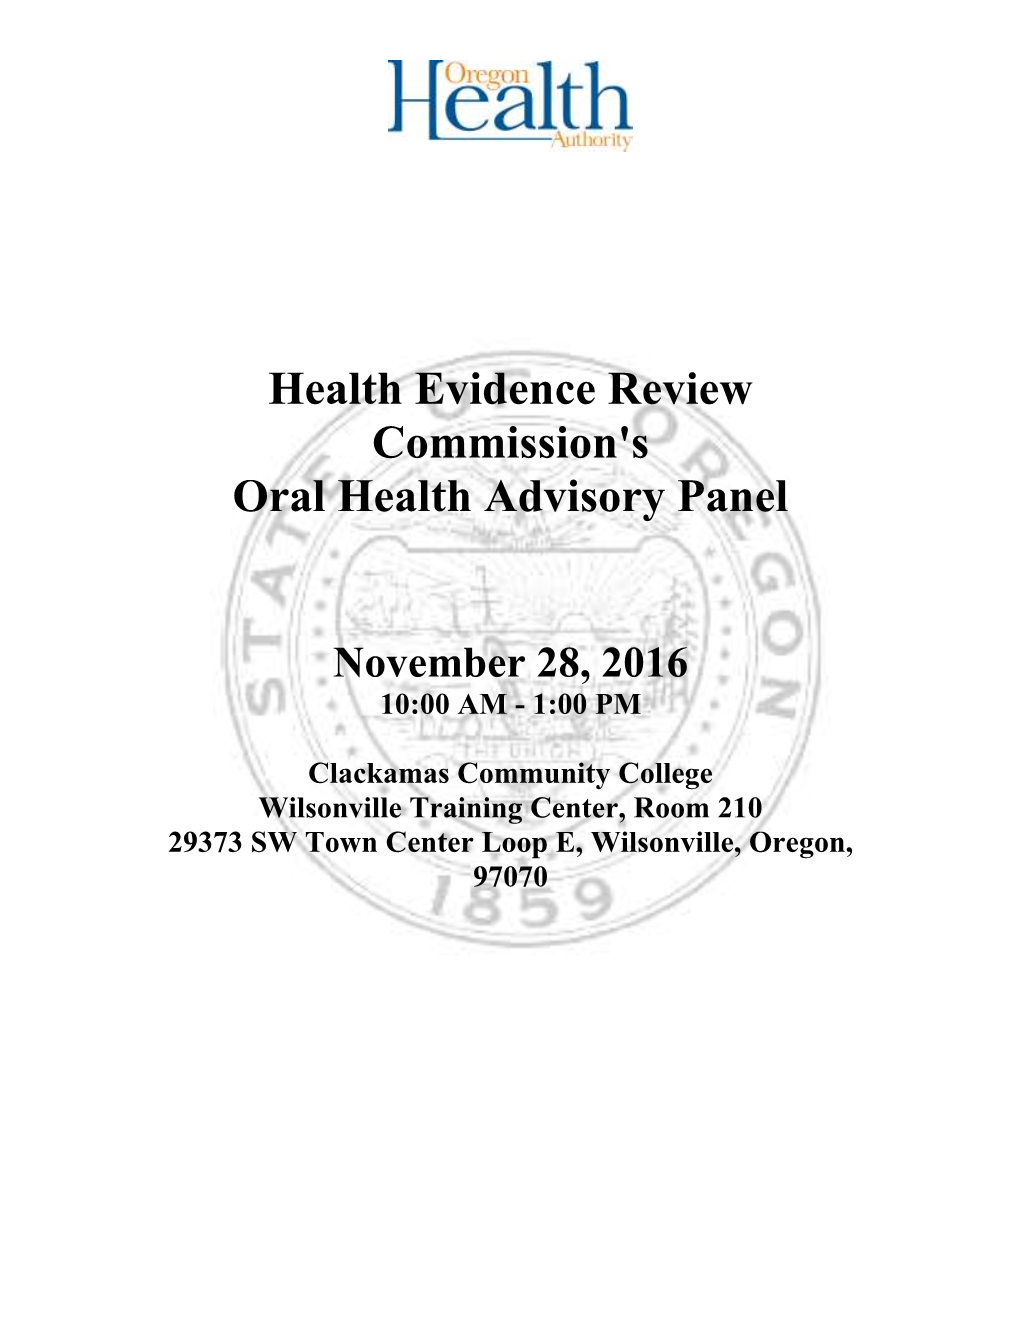 Health Evidence Review Commission's Oral Health Advisory Panel